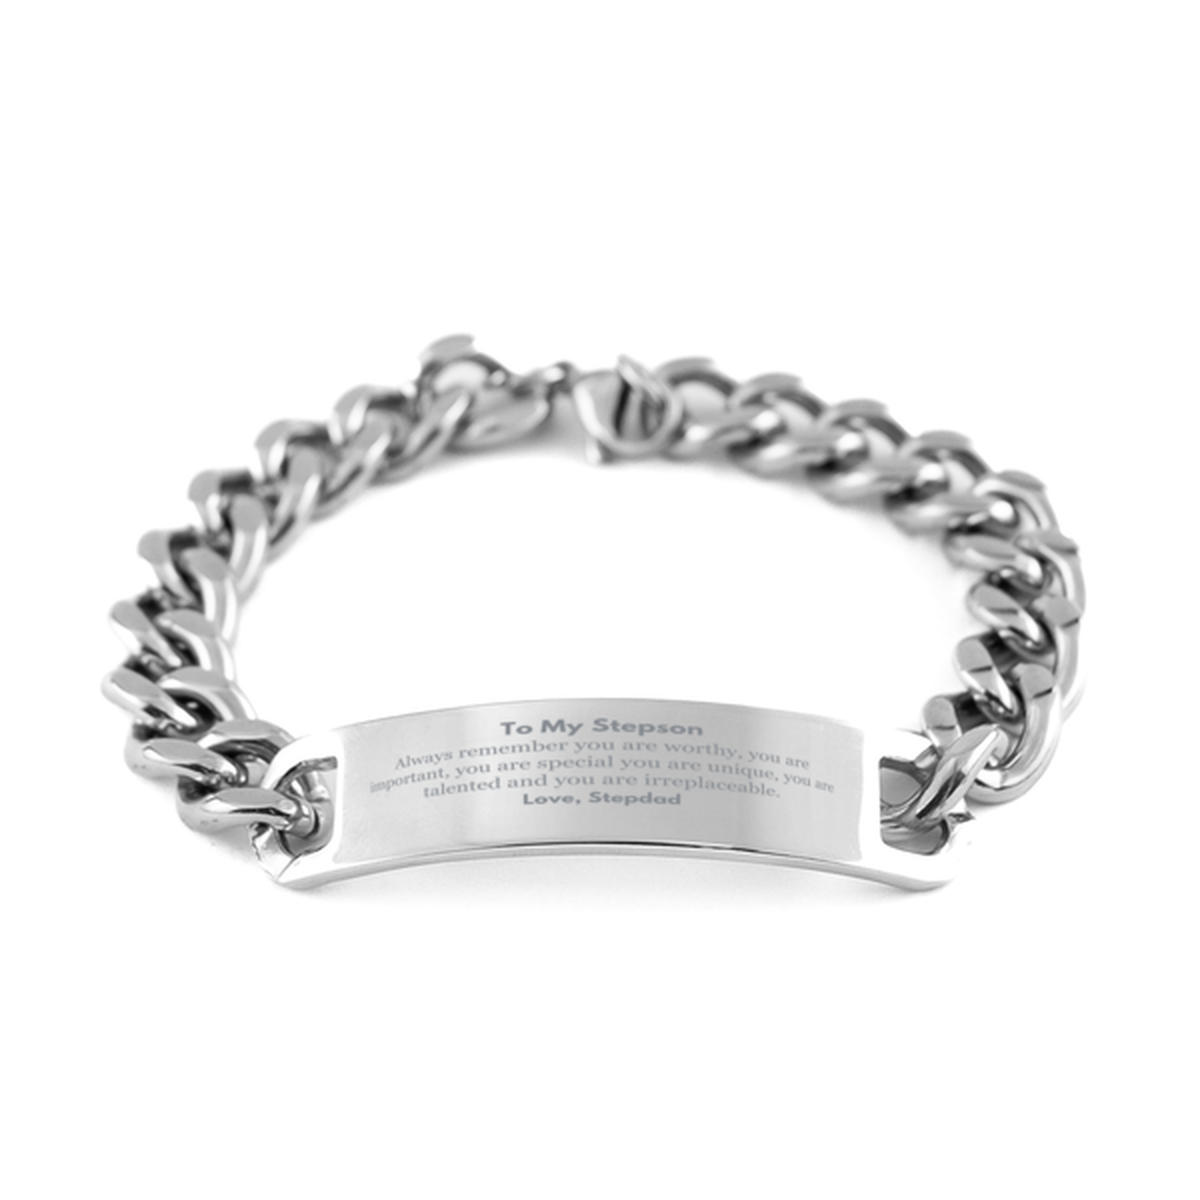 Stepson Birthday Gifts from Stepdad, Inspirational Cuban Chain Stainless Steel Bracelet for Stepson Christmas Graduation Gifts for Stepson Always remember you are worthy, you are important. Love, Stepdad